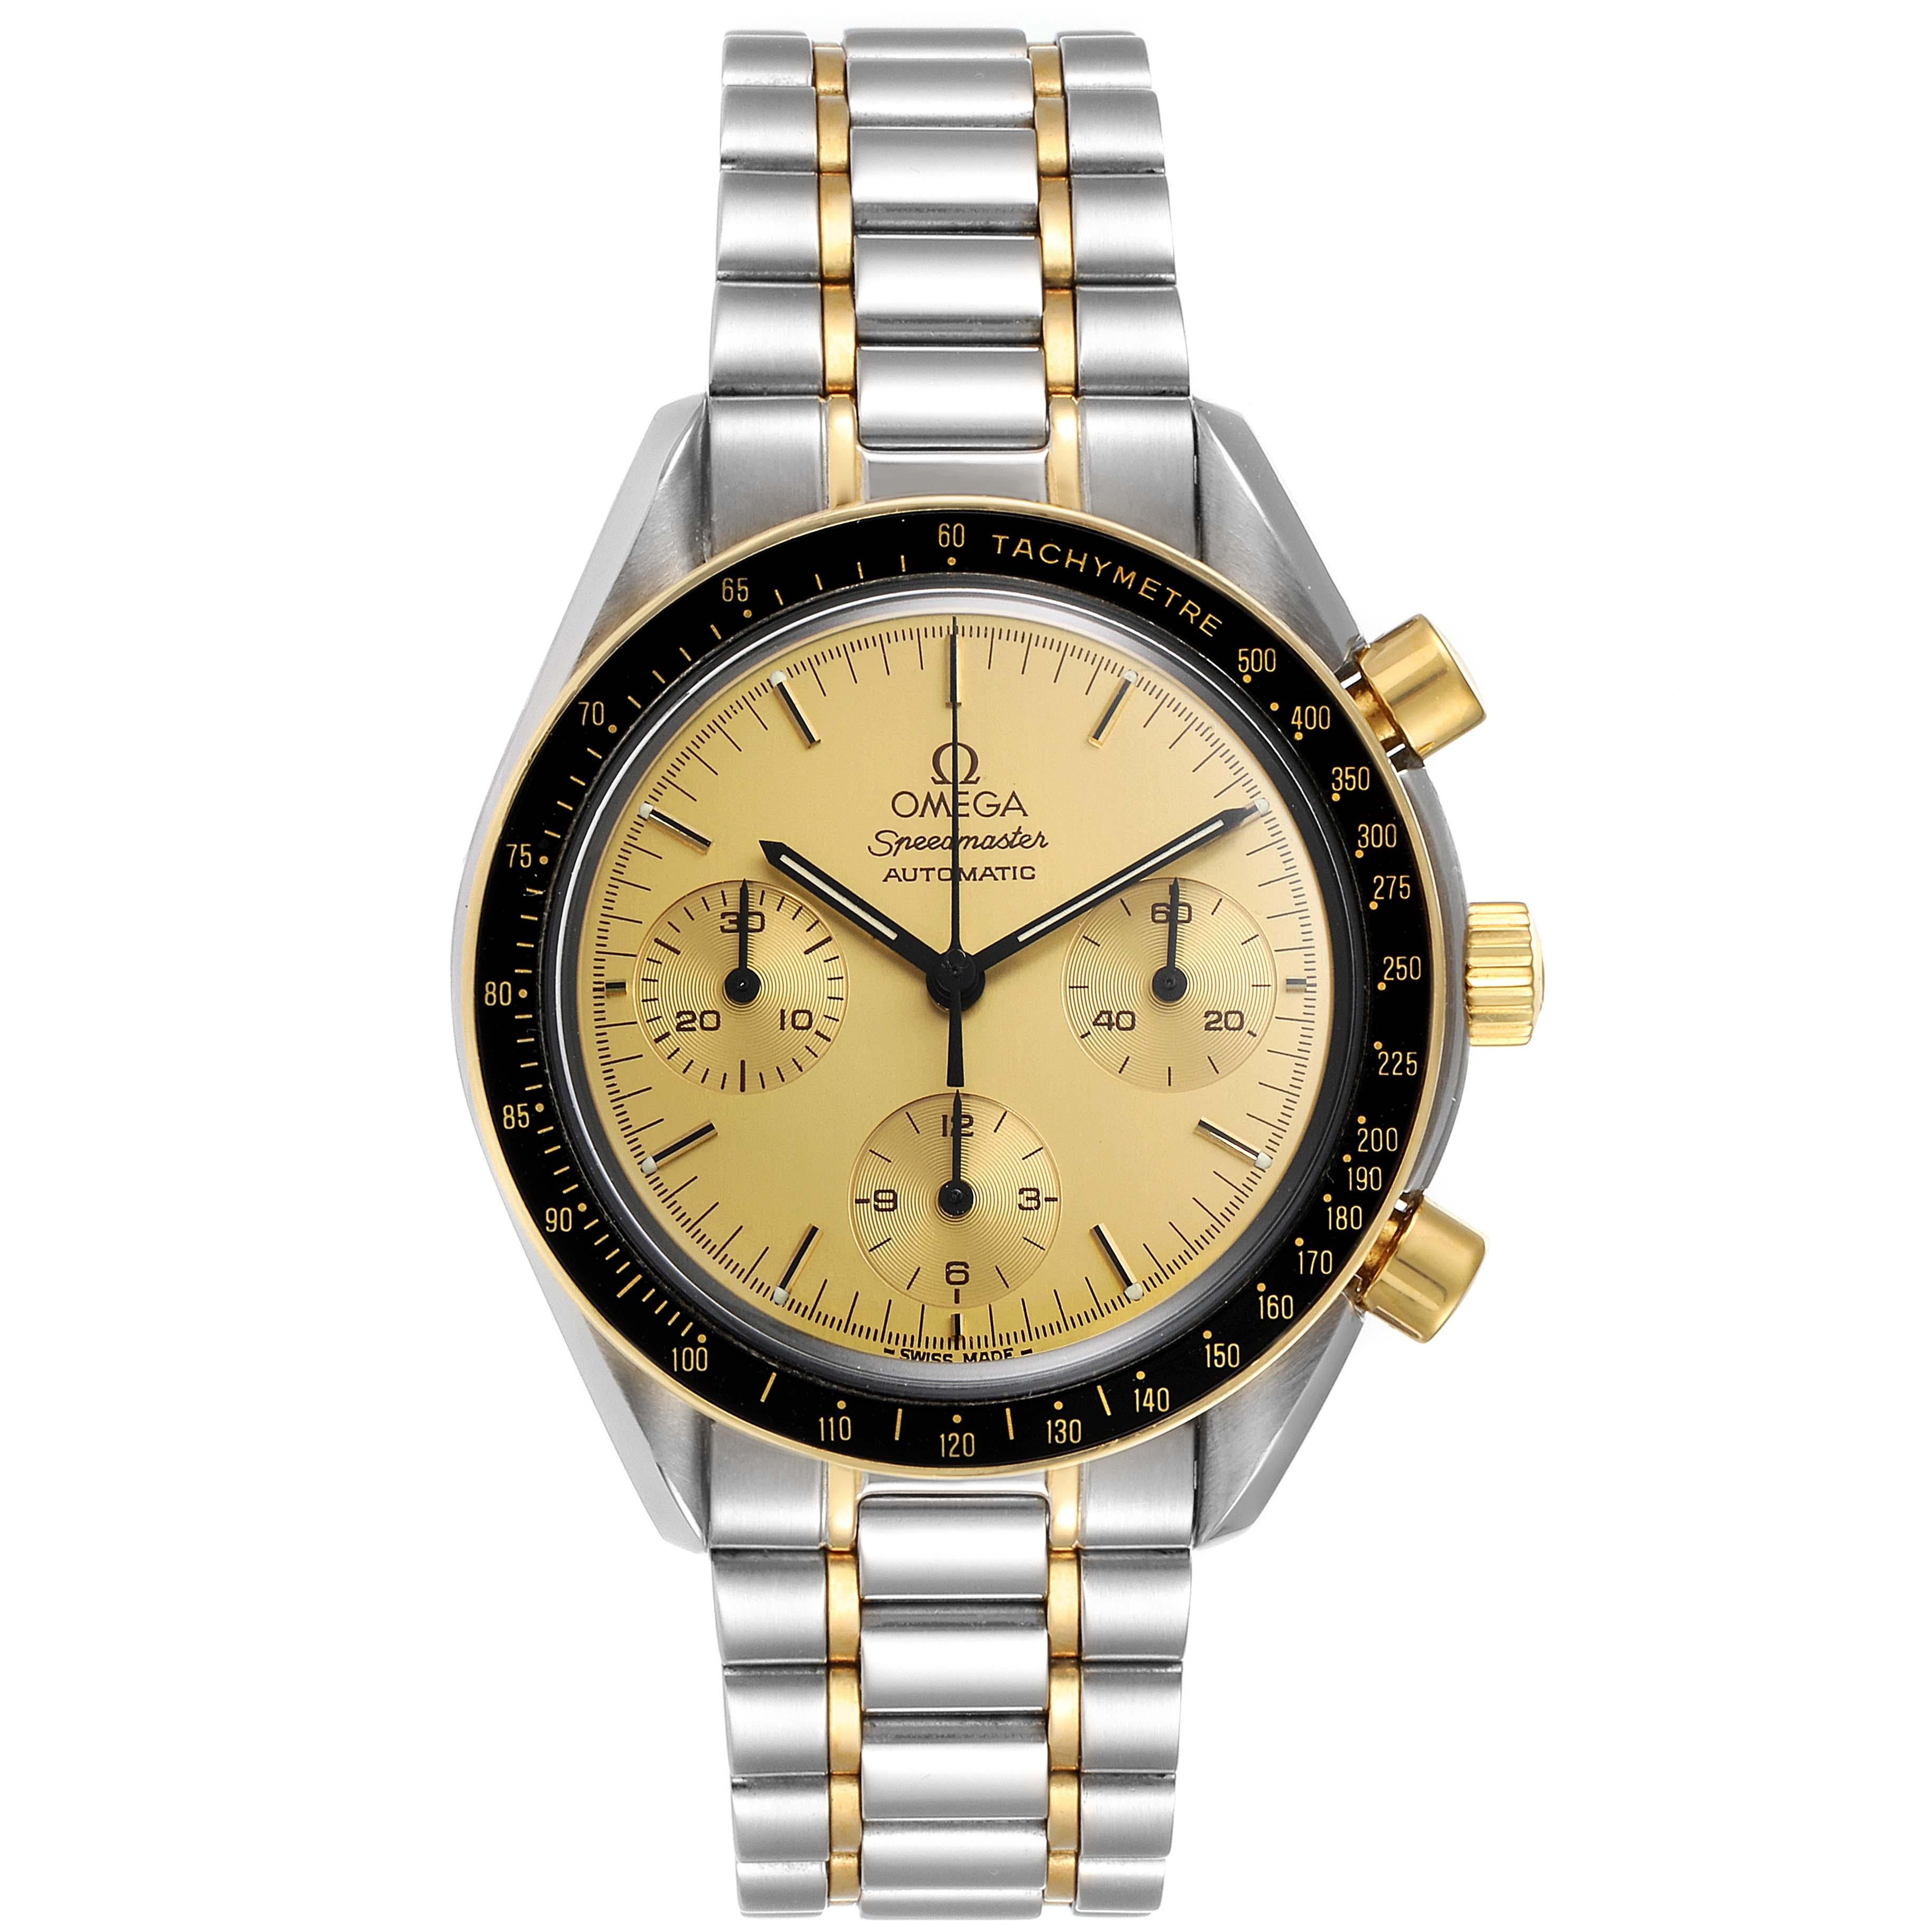 Omega Speedmaster Steel 18K Yellow Gold Automatic Watch 3310.10.00. Automatic self-winding chronograph movement. Stainless steel and yellow gold round case 39.0 mm in diameter. Black yellow gold treammed bezel with tachymetre function. Hasalite